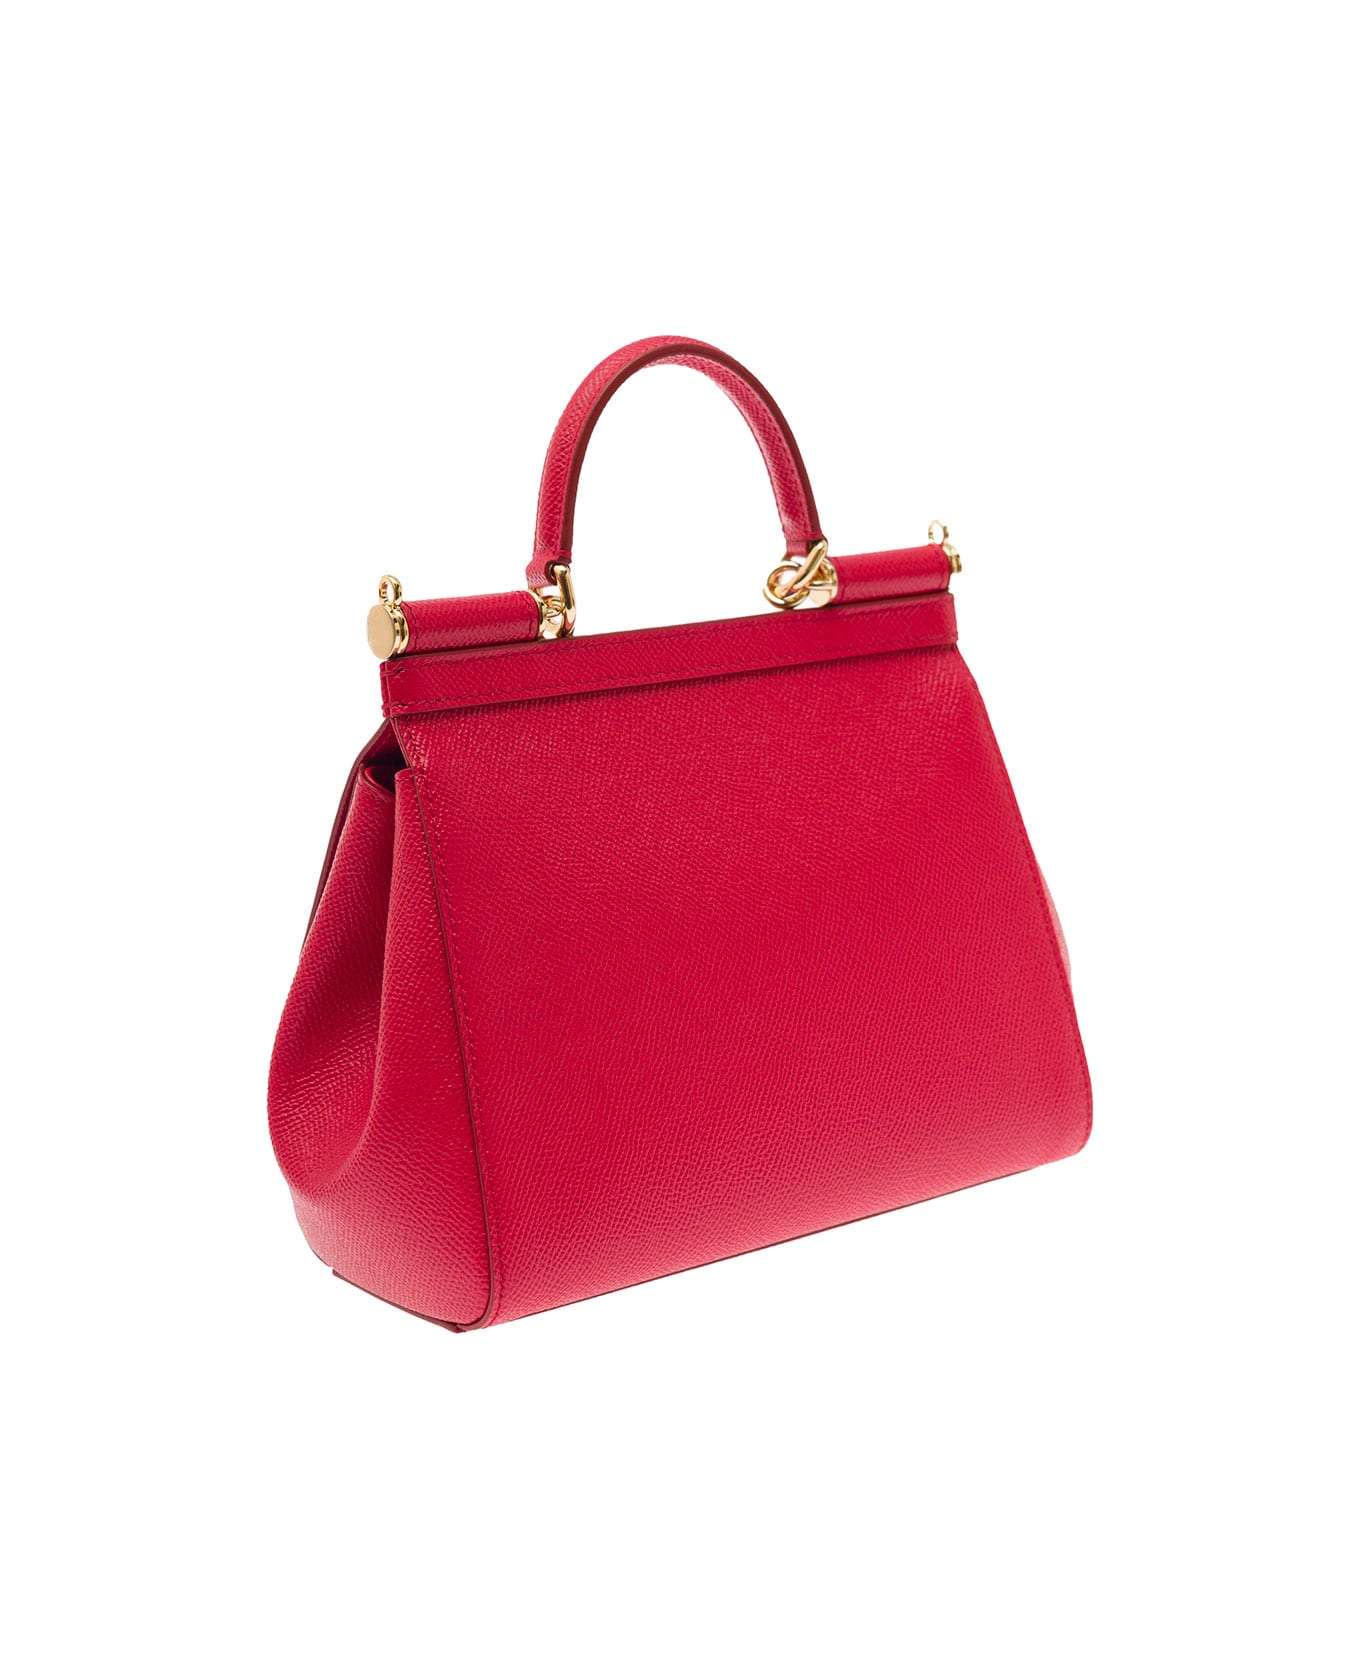 Dolce & Gabbana Sicily Dauphine Handbag In Red Leather Woman - Red